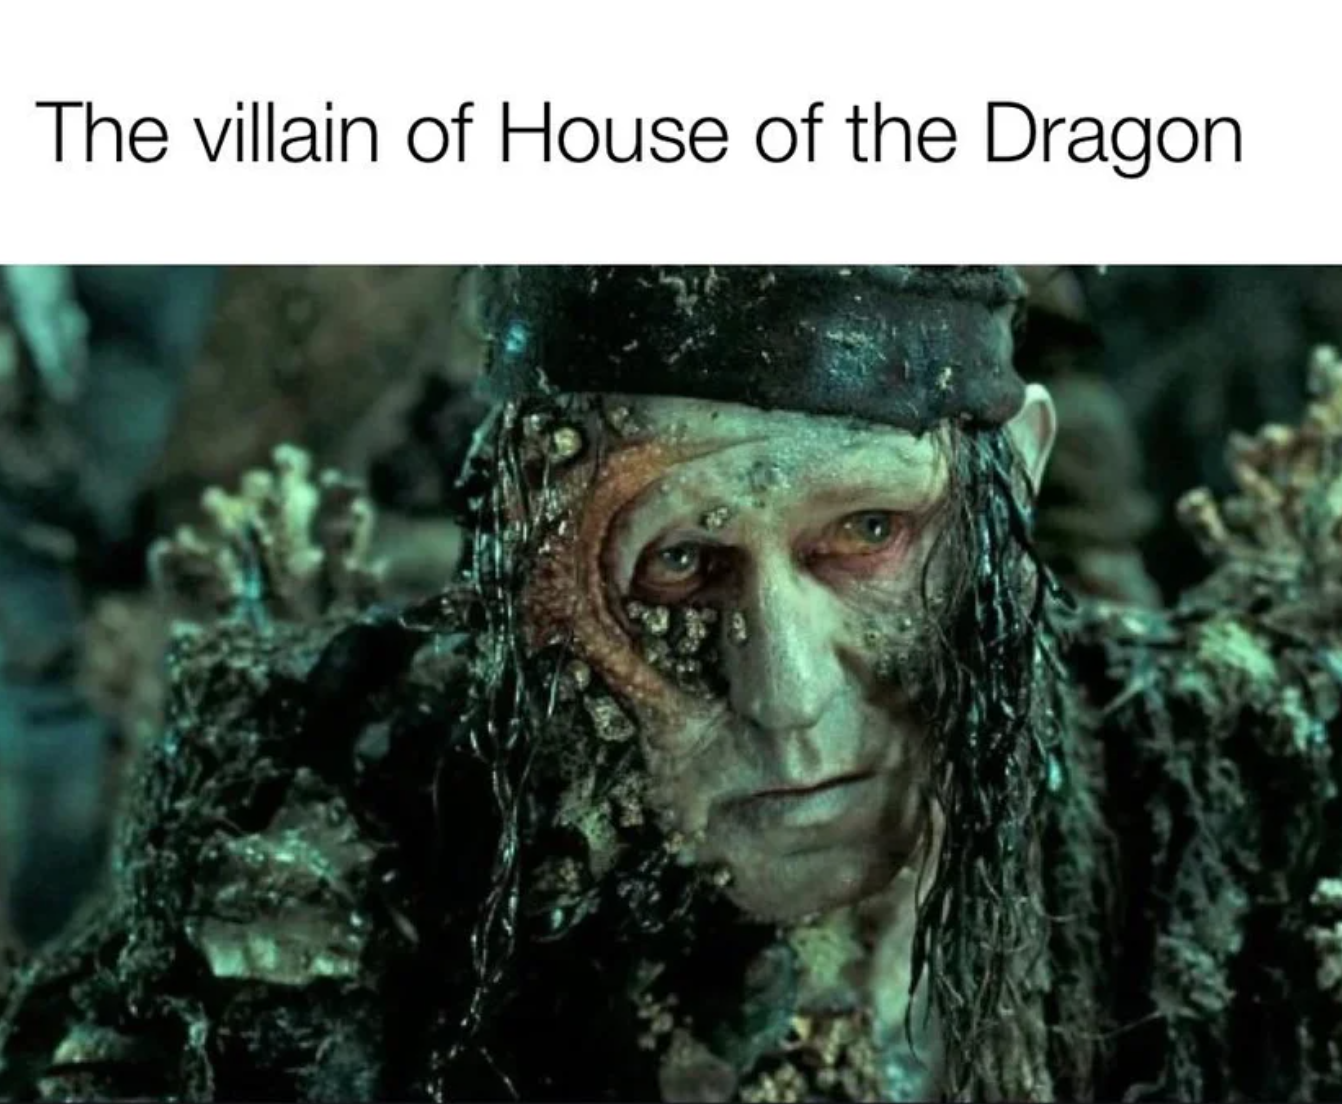 House of the Dragon Episode 2 memes - human - The villain of House of the Dragon